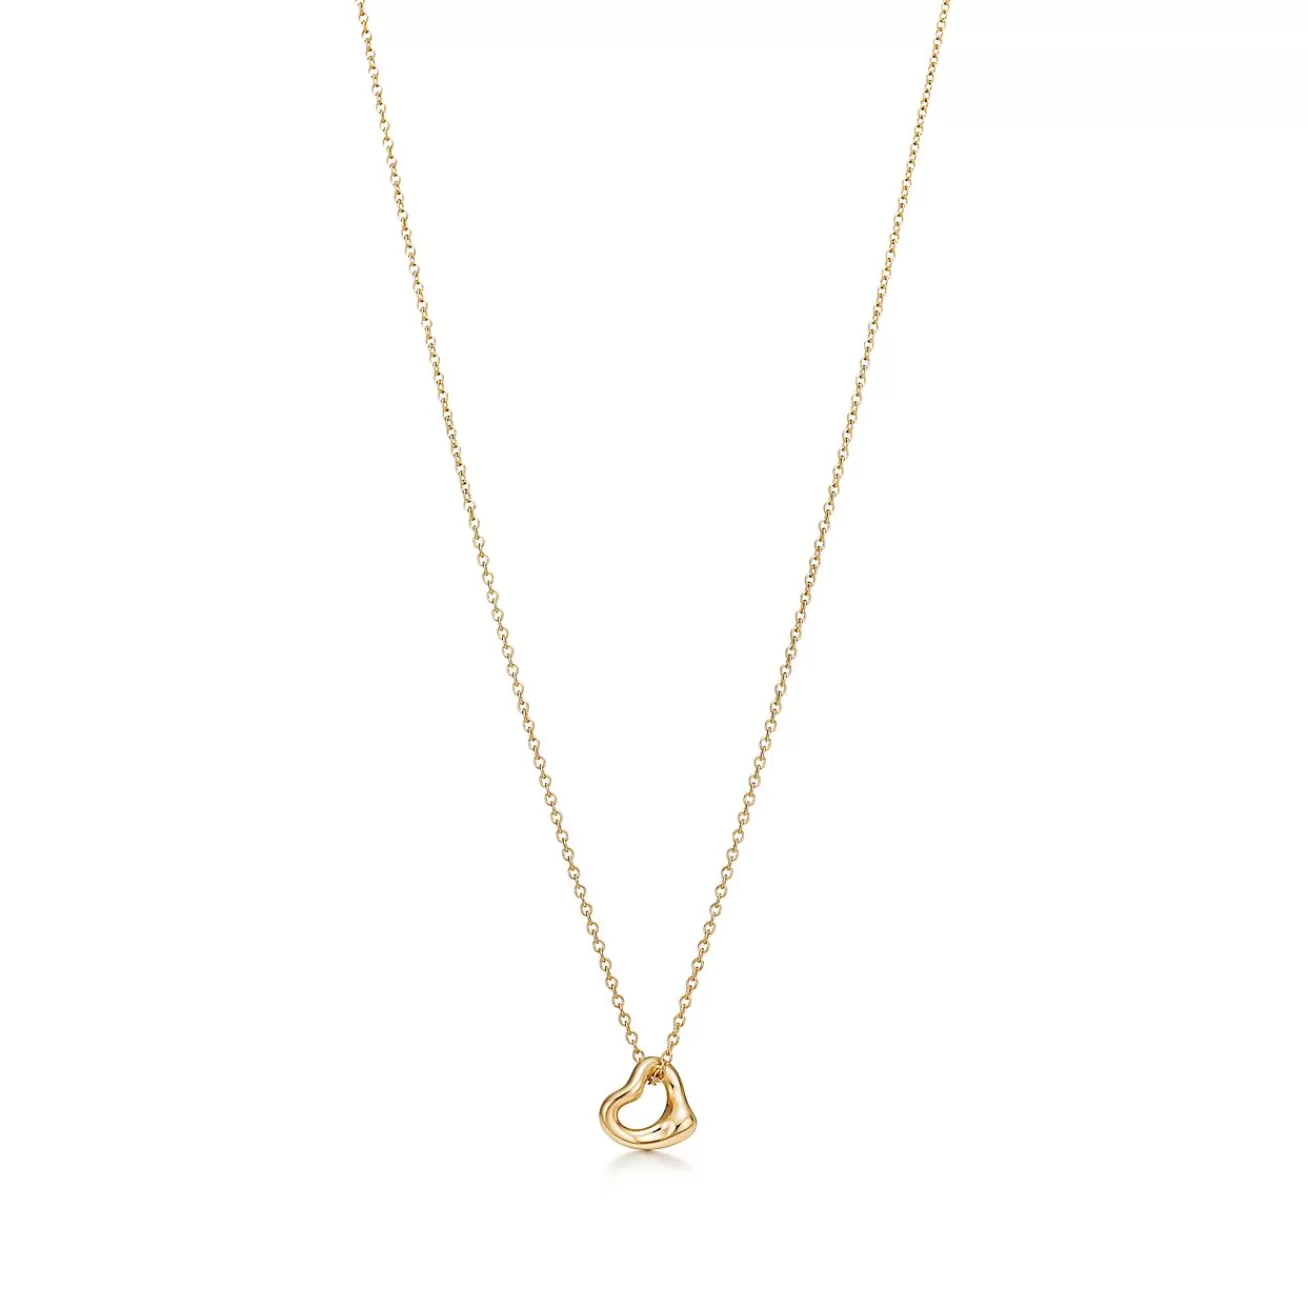 Tiffany & Co. Elsa Peretti® Open Heart Pendant in Yellow Gold, 7 mm | ^ Necklaces & Pendants | Gifts for Her